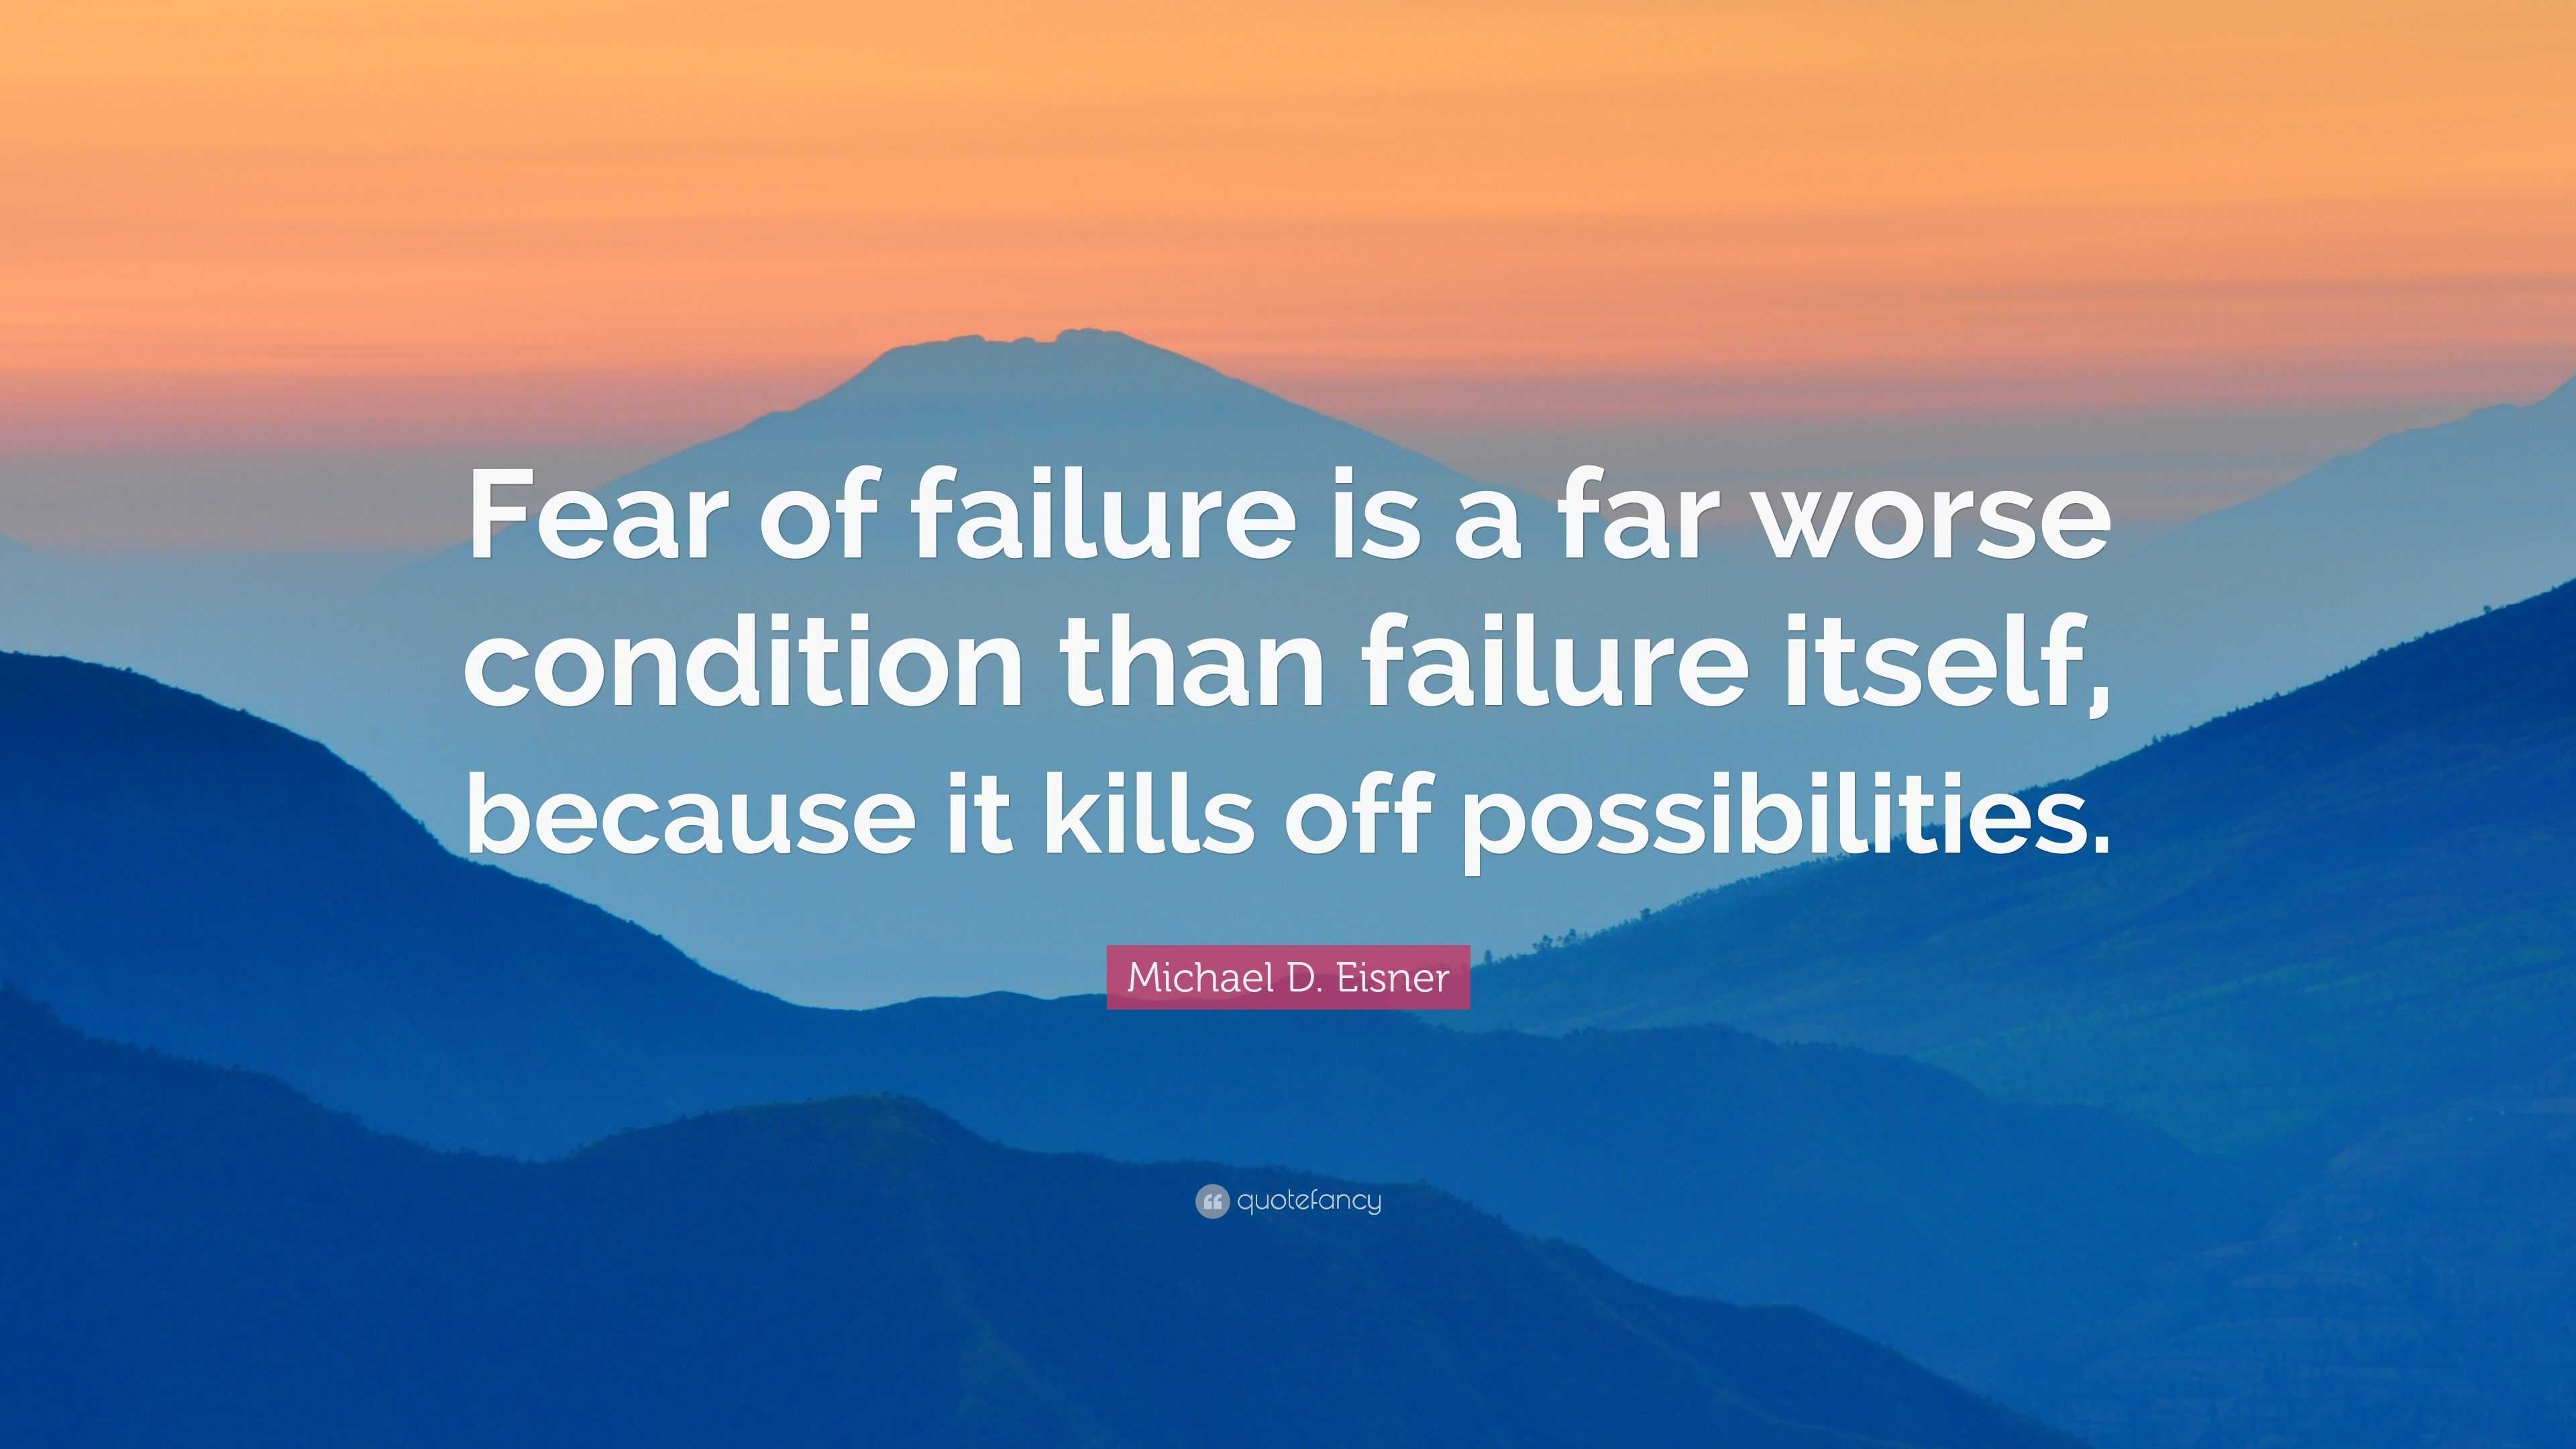 Michael D. Eisner Quote: “Fear of failure is a far worse condition than